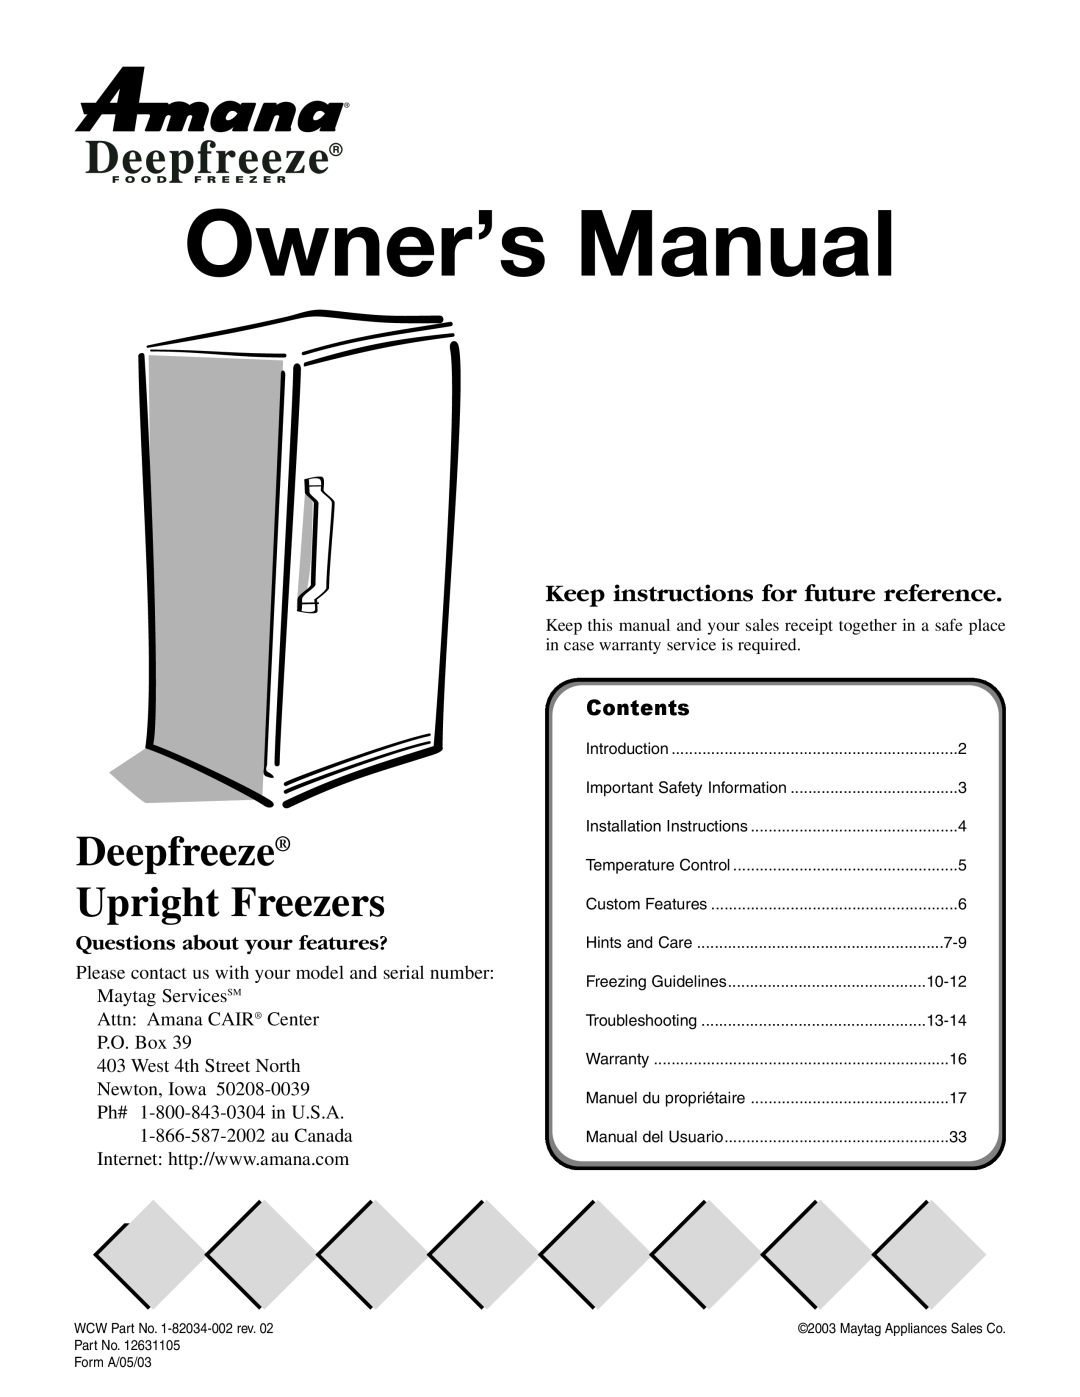 Amana 1-82034-002 owner manual Deepfreeze Upright Freezers, Keep instructions for future reference, Contents, Warranty 